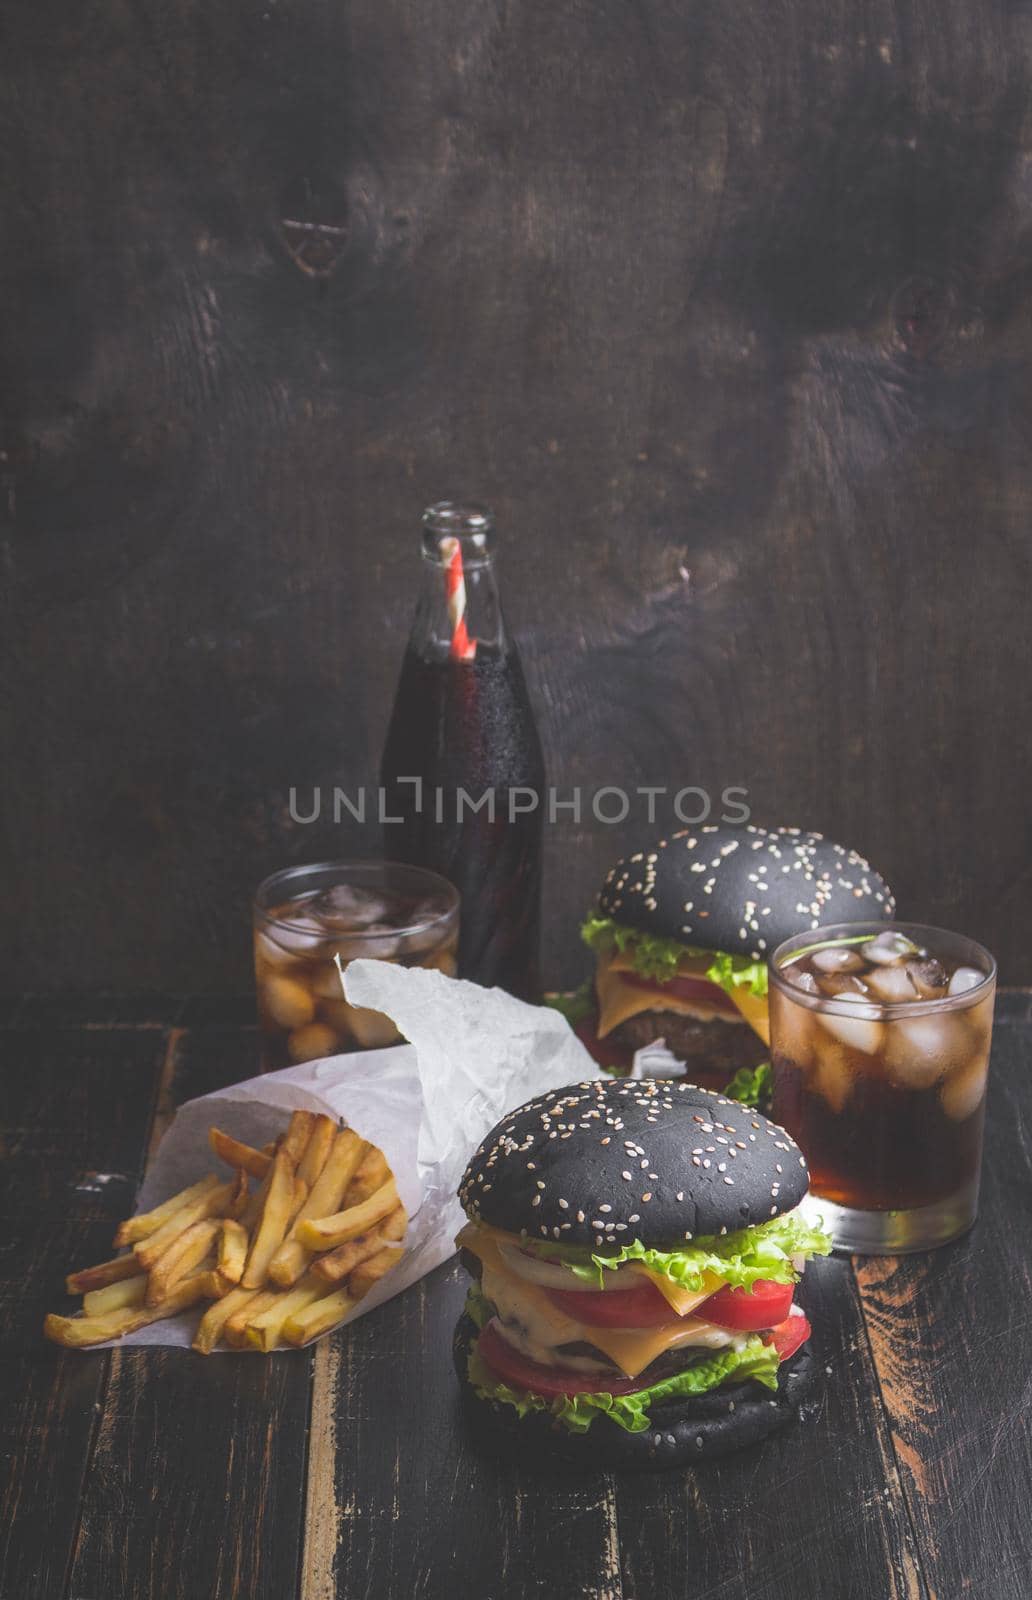 Set of black burgers with meat patty, cheese, tomatoes, mayonnaise, french fries in a paper cup and glass of cold cola soda with ice. Dark wooden rustic table. Modern fast food lunch. Toned image